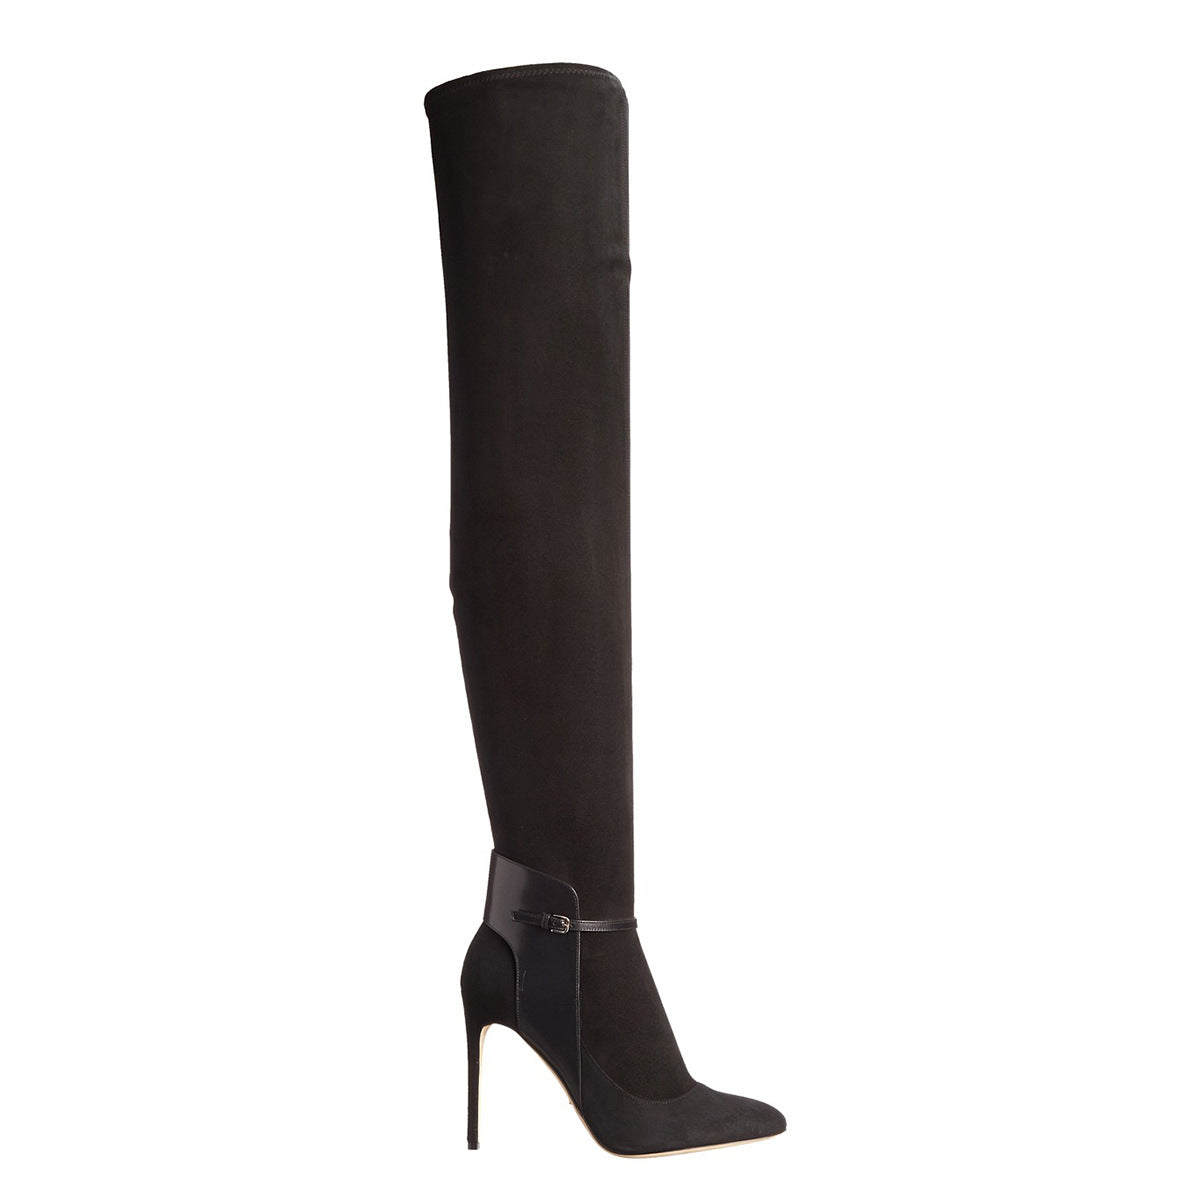 Patchwork Stiletto High Heel Pointed Toe Zipper Over the Knee Long Boots